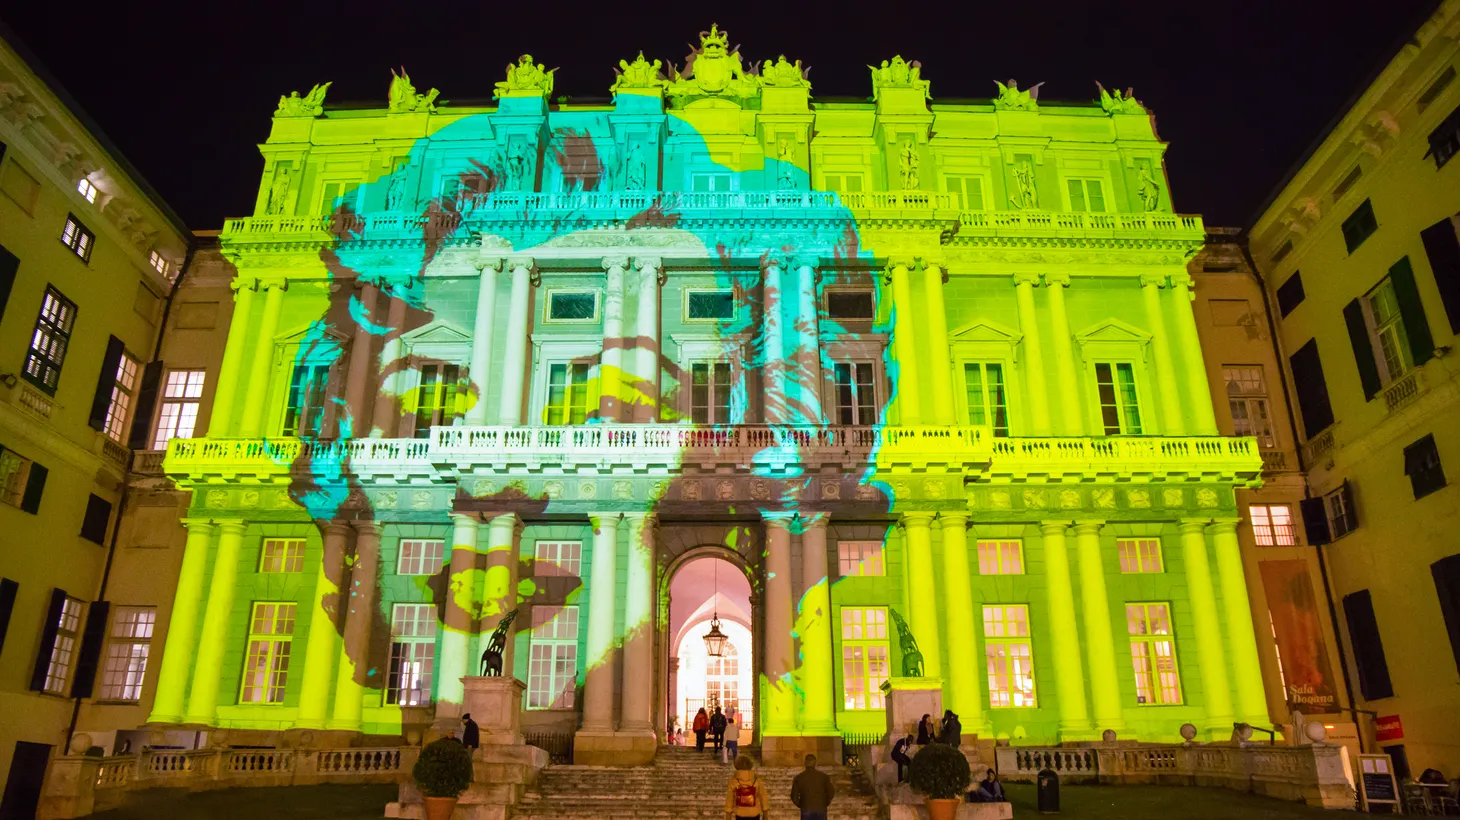 The Palazzo Ducale in Italy hosts a show dedicated to Andy Warhol, with Marilyn Monroe’s face projected onto the building’s exterior. Monroe became a friend of the artist. December 28, 2016.